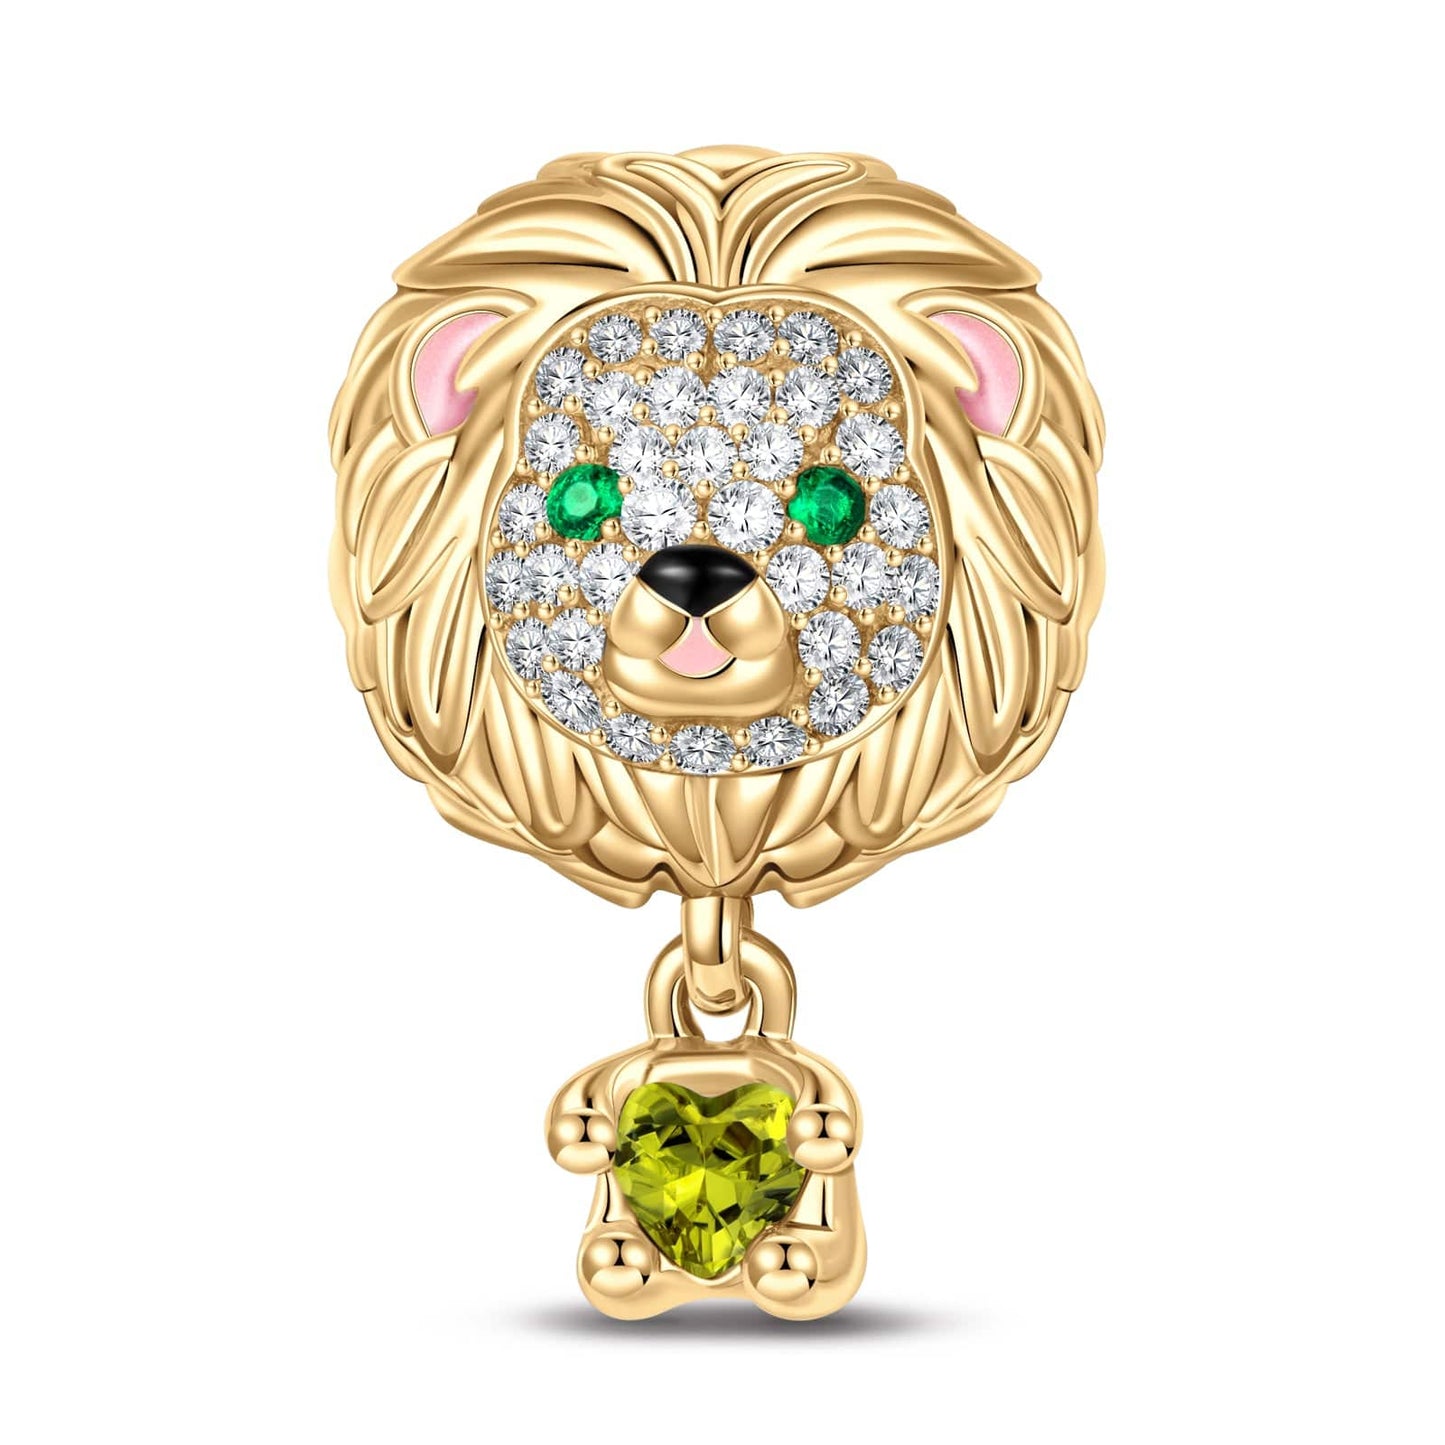 Love Hug Lion Tarnish-resistant Silver Animal Charms With Enamel In 14K Gold Plated - Heartful Hugs Collection